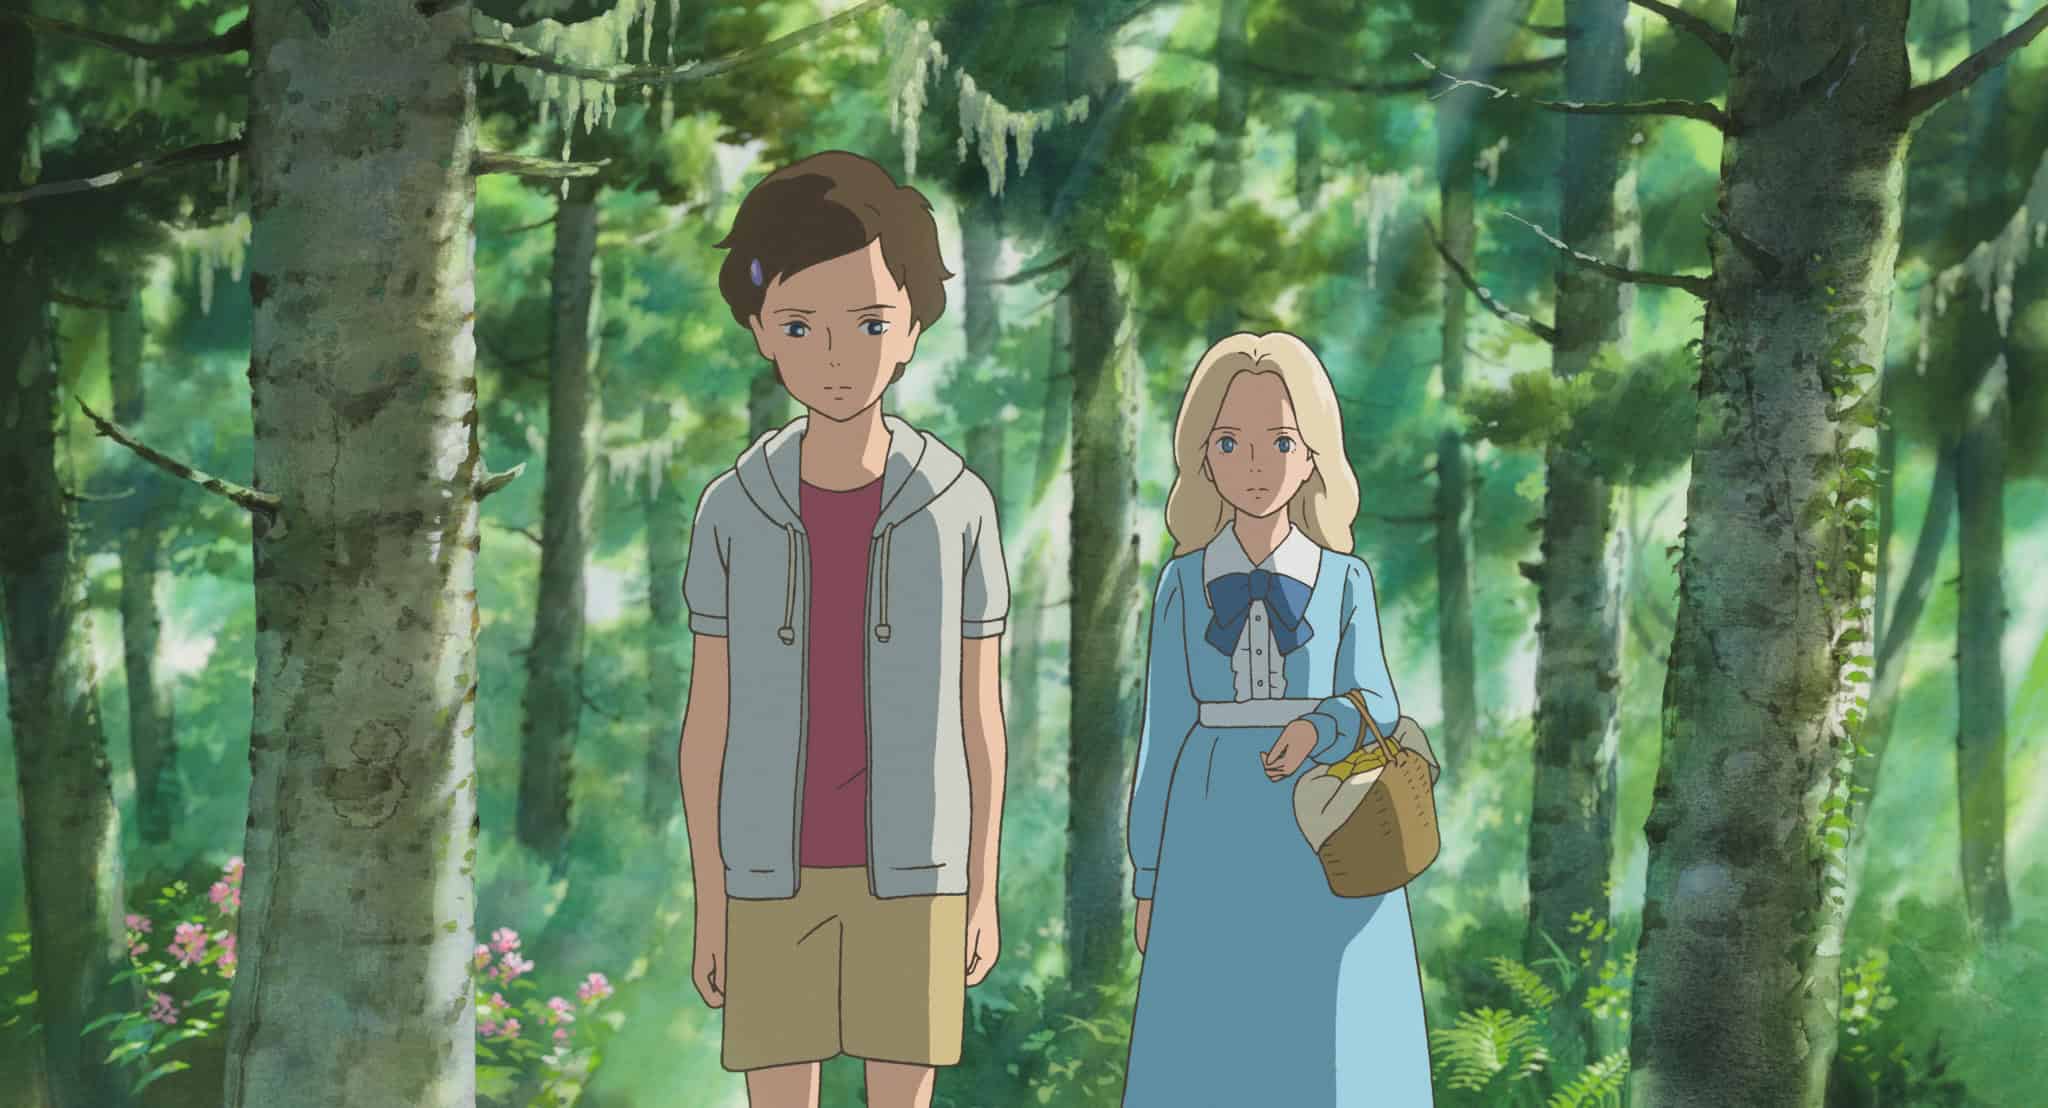 An animated girl in a modern dress and a girl in an old-fashioned dress walk through the woods in this image from Studio Ghibli.